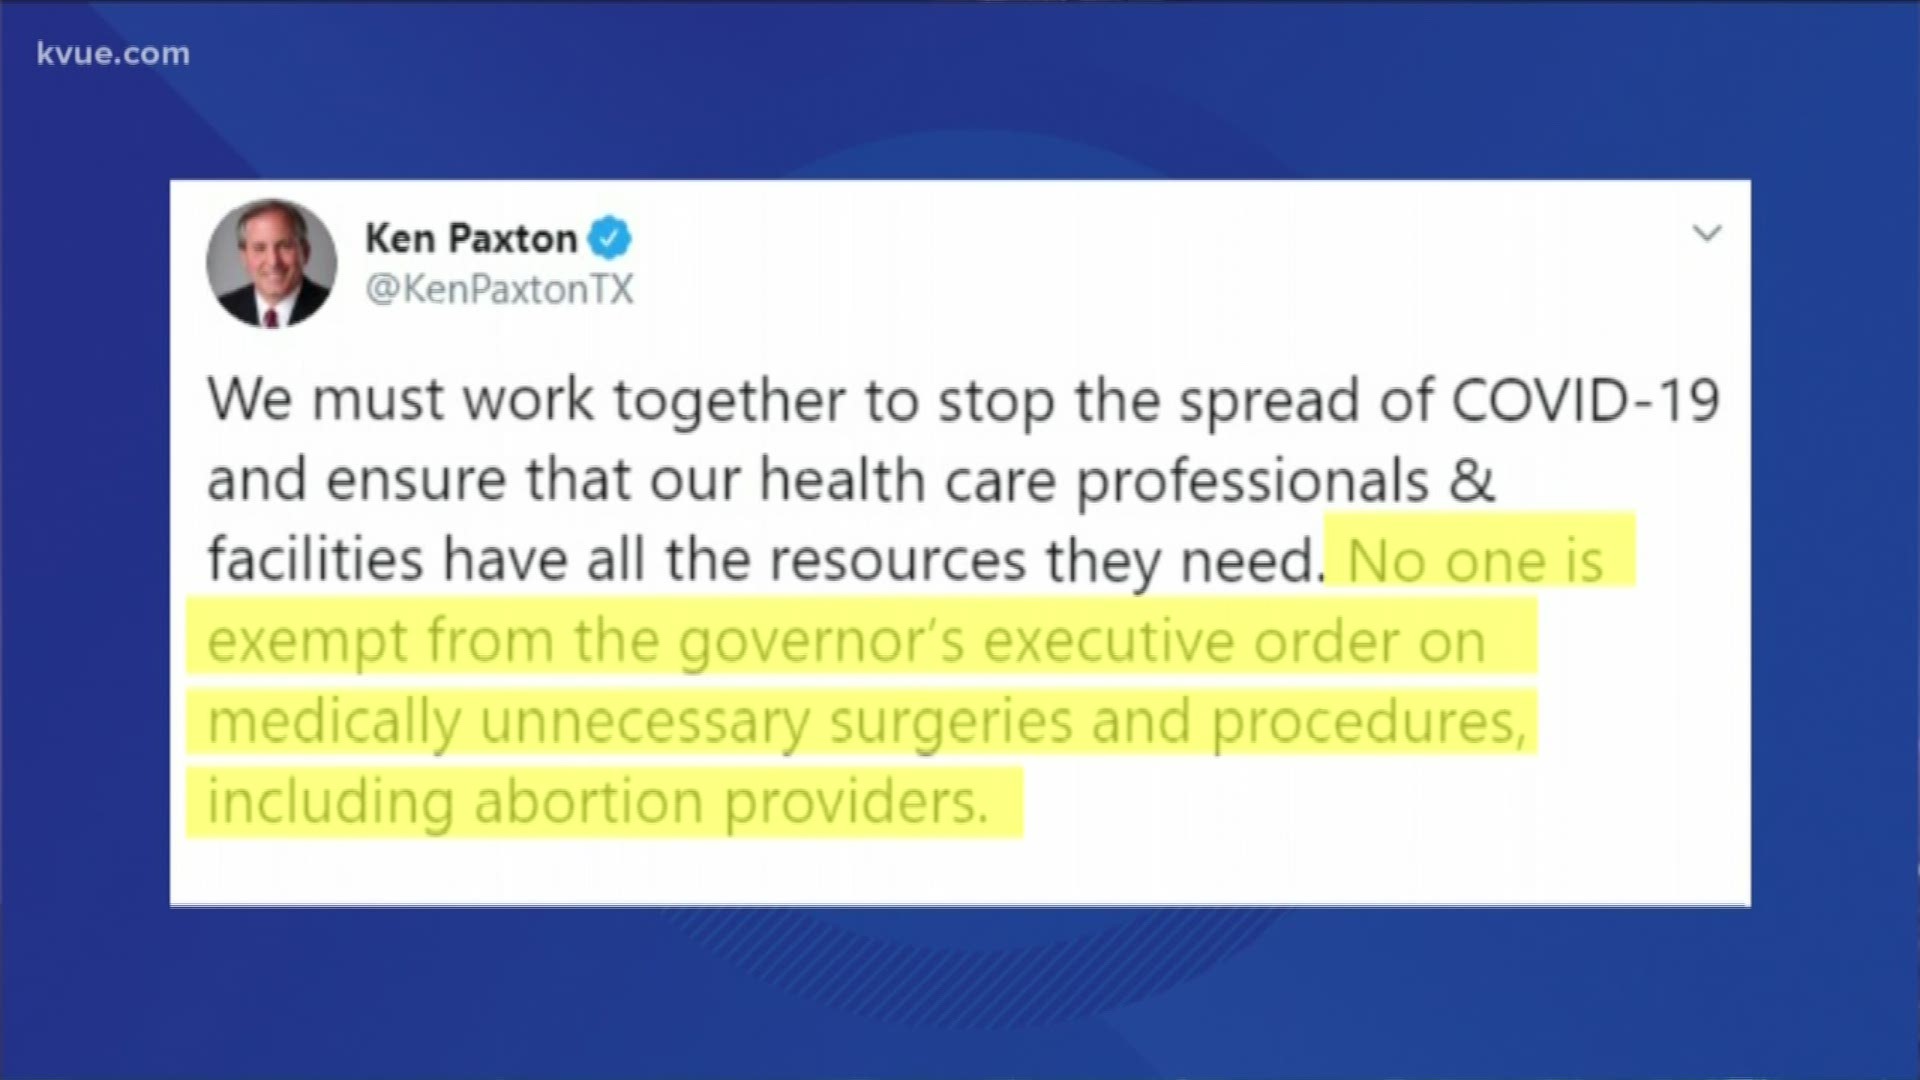 Gov. Abbott issued an emergency order stopping all medically unnecessary surgeries and procedures. AG Paxton says that includes most abortions.